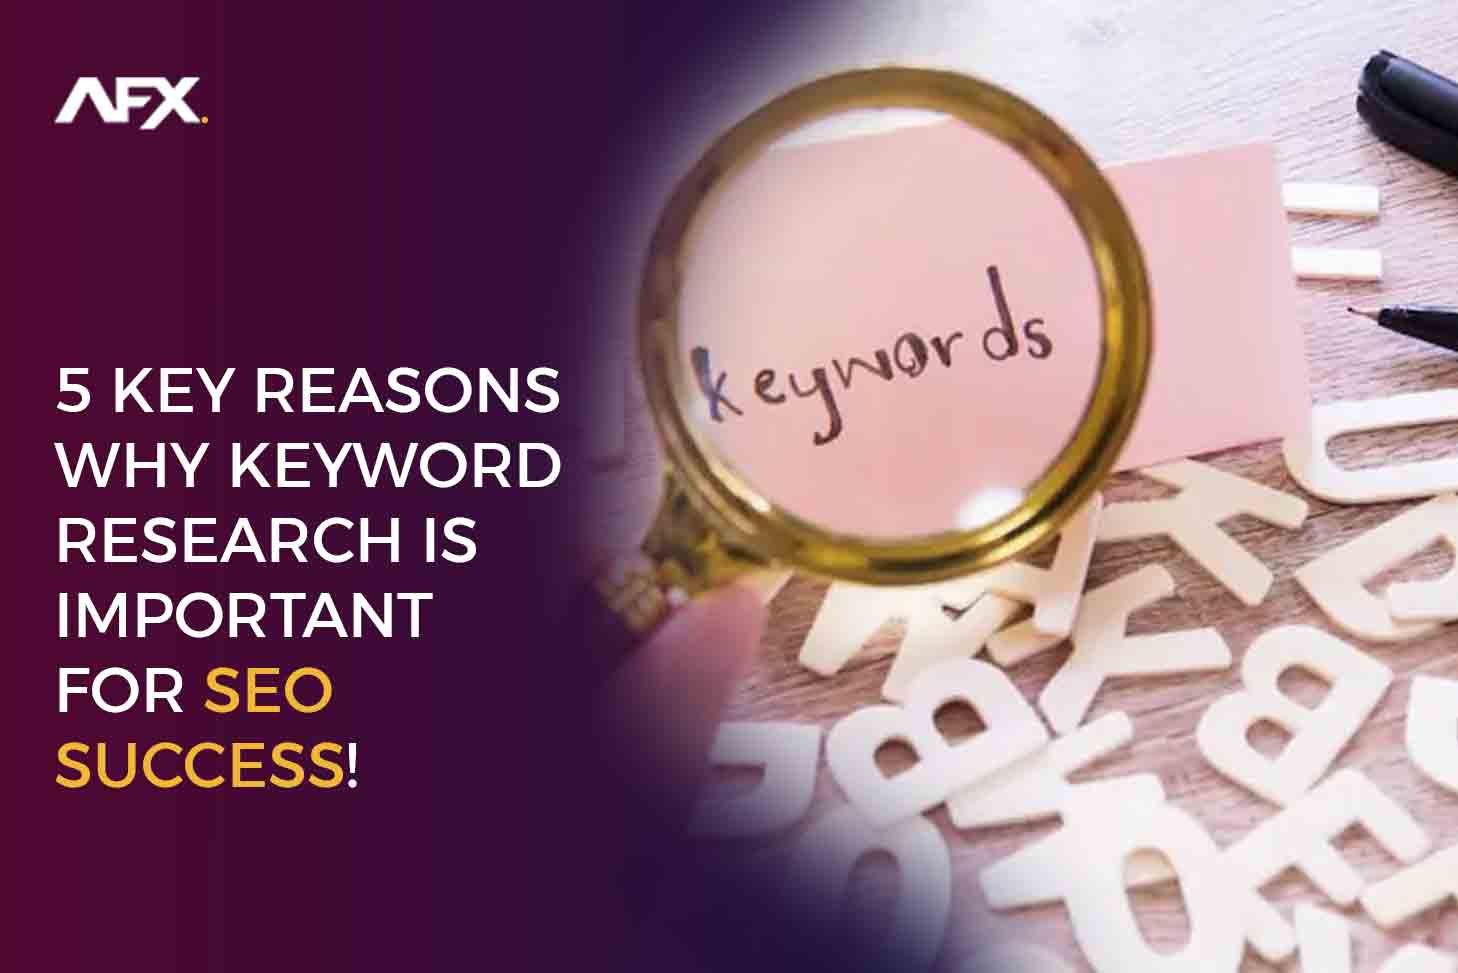 Keyword Research For SEO Success